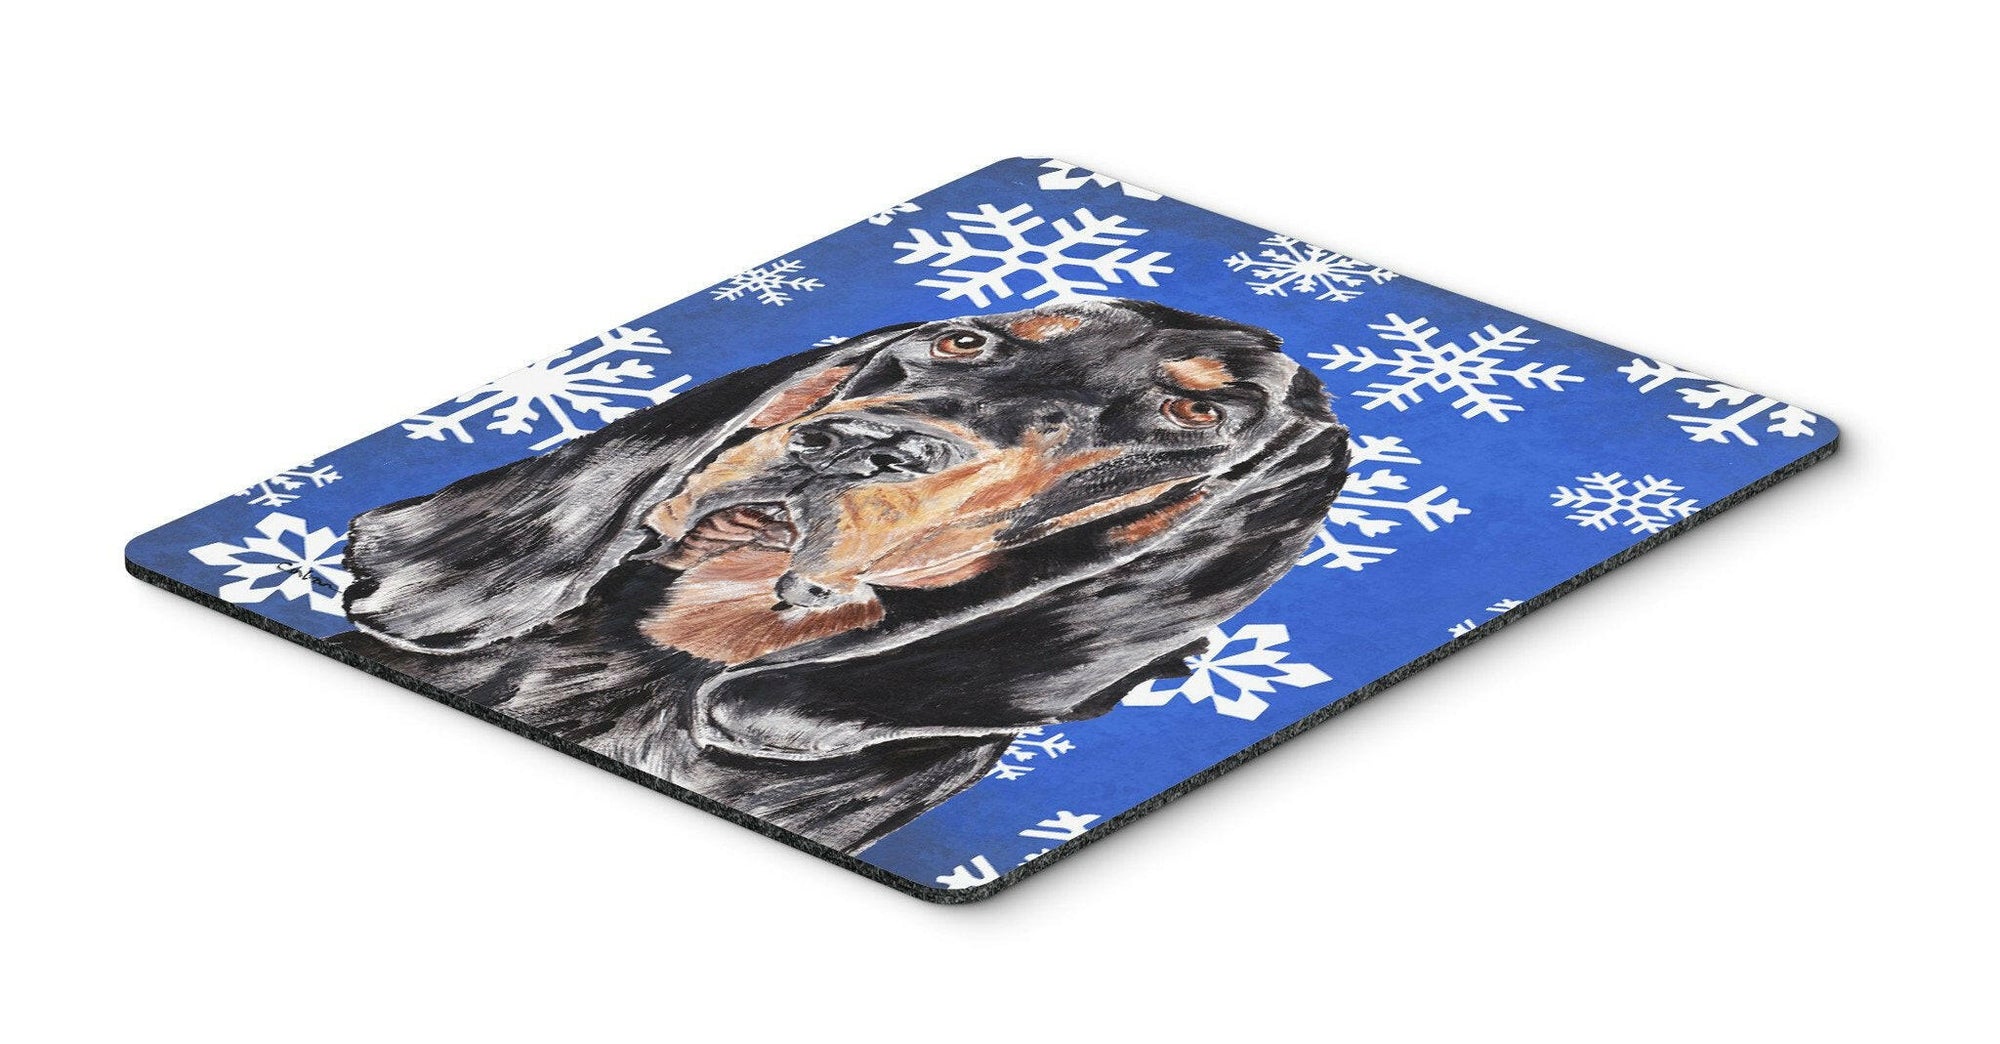 Coonhound Blue Snowflake Winter Mouse Pad, Hot Pad or Trivet by Caroline's Treasures